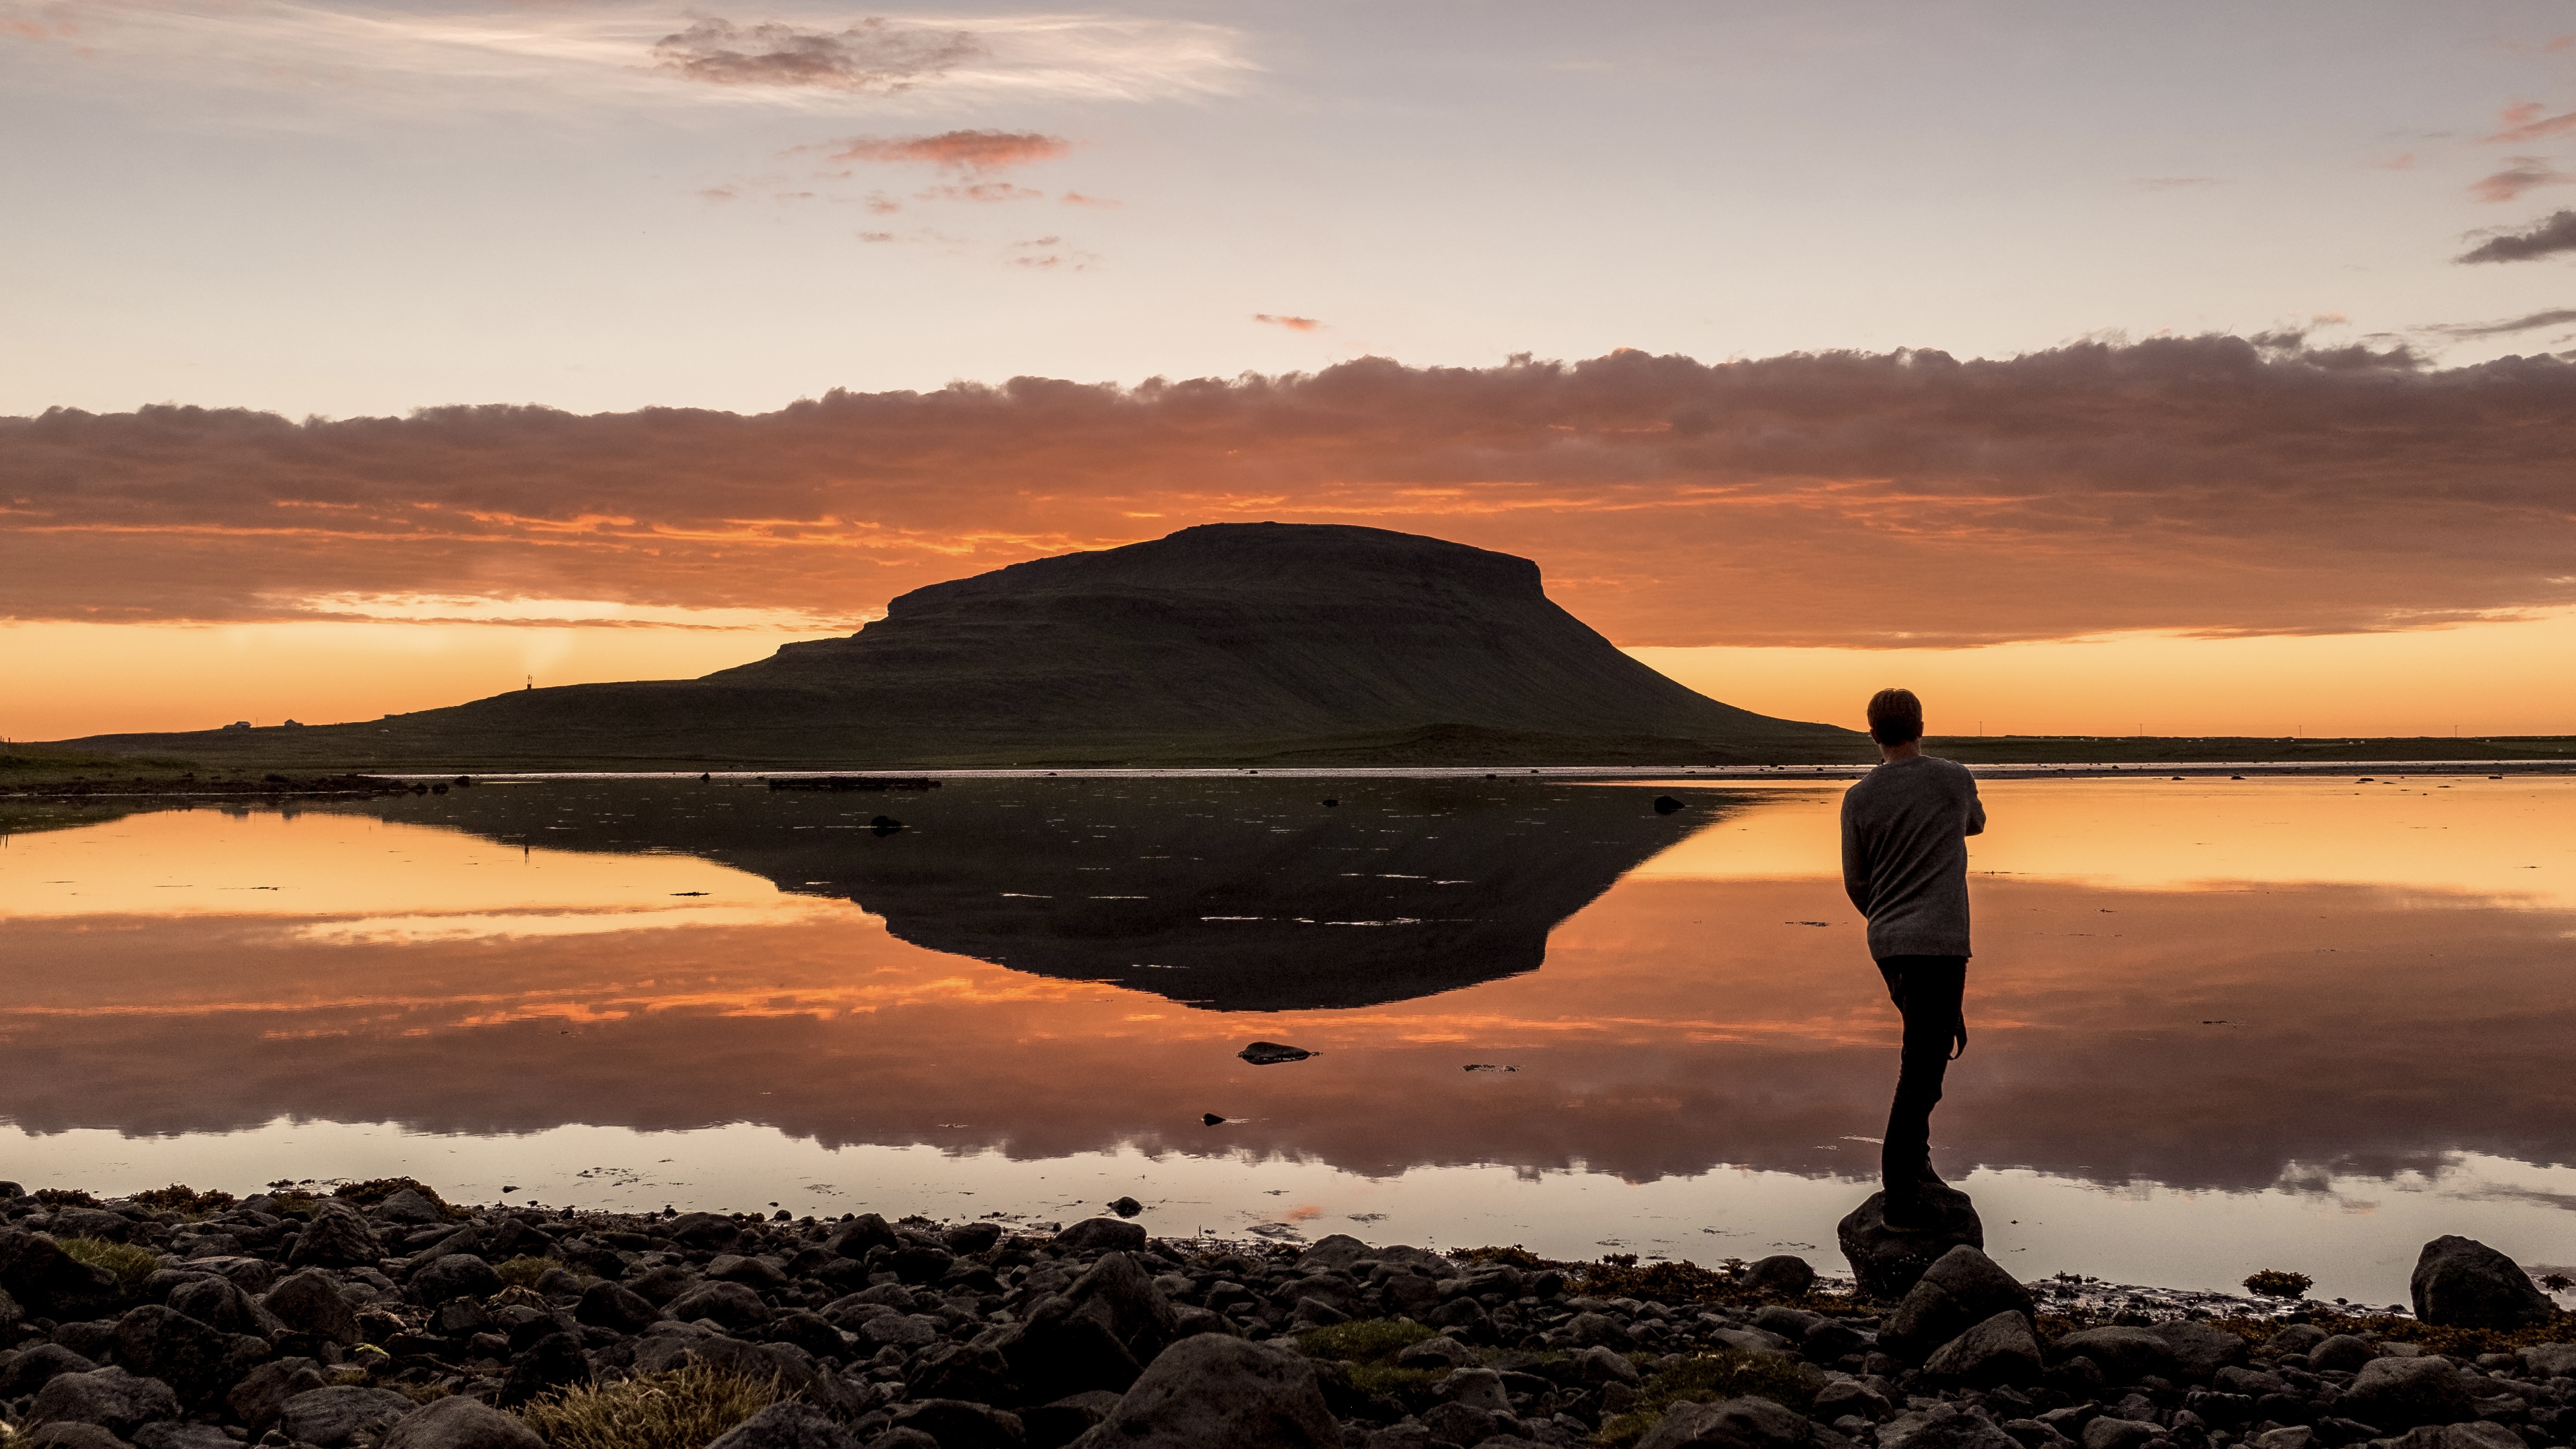 man_standing_on_a_rocky_shore_and_reflection_of_a_rock_peak_on_calm_water_at_sunset-4812x3208